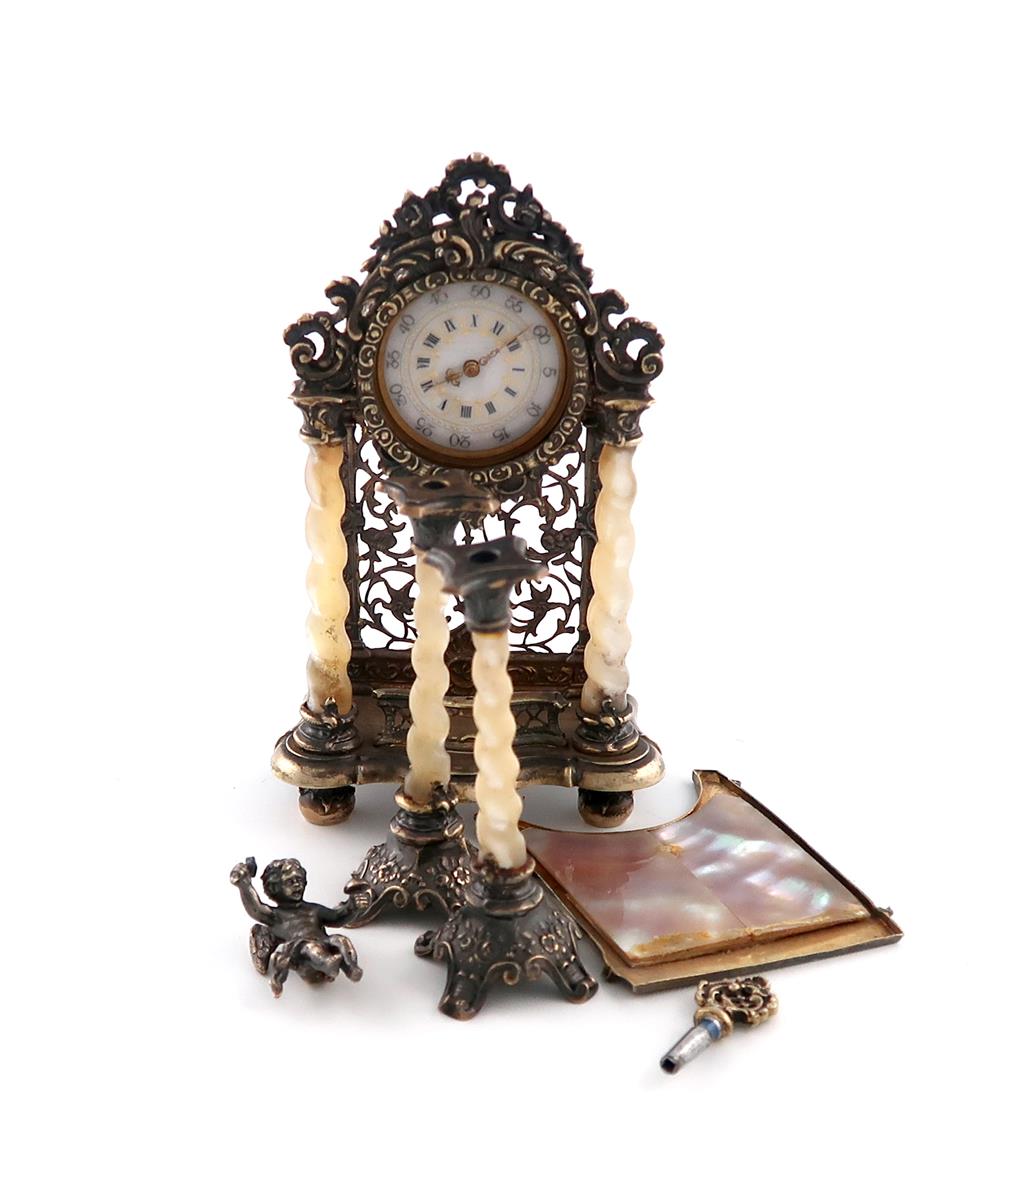 A late-Victorian silver-gilt and mother-of-pearl clock, with import marks for London 1891,